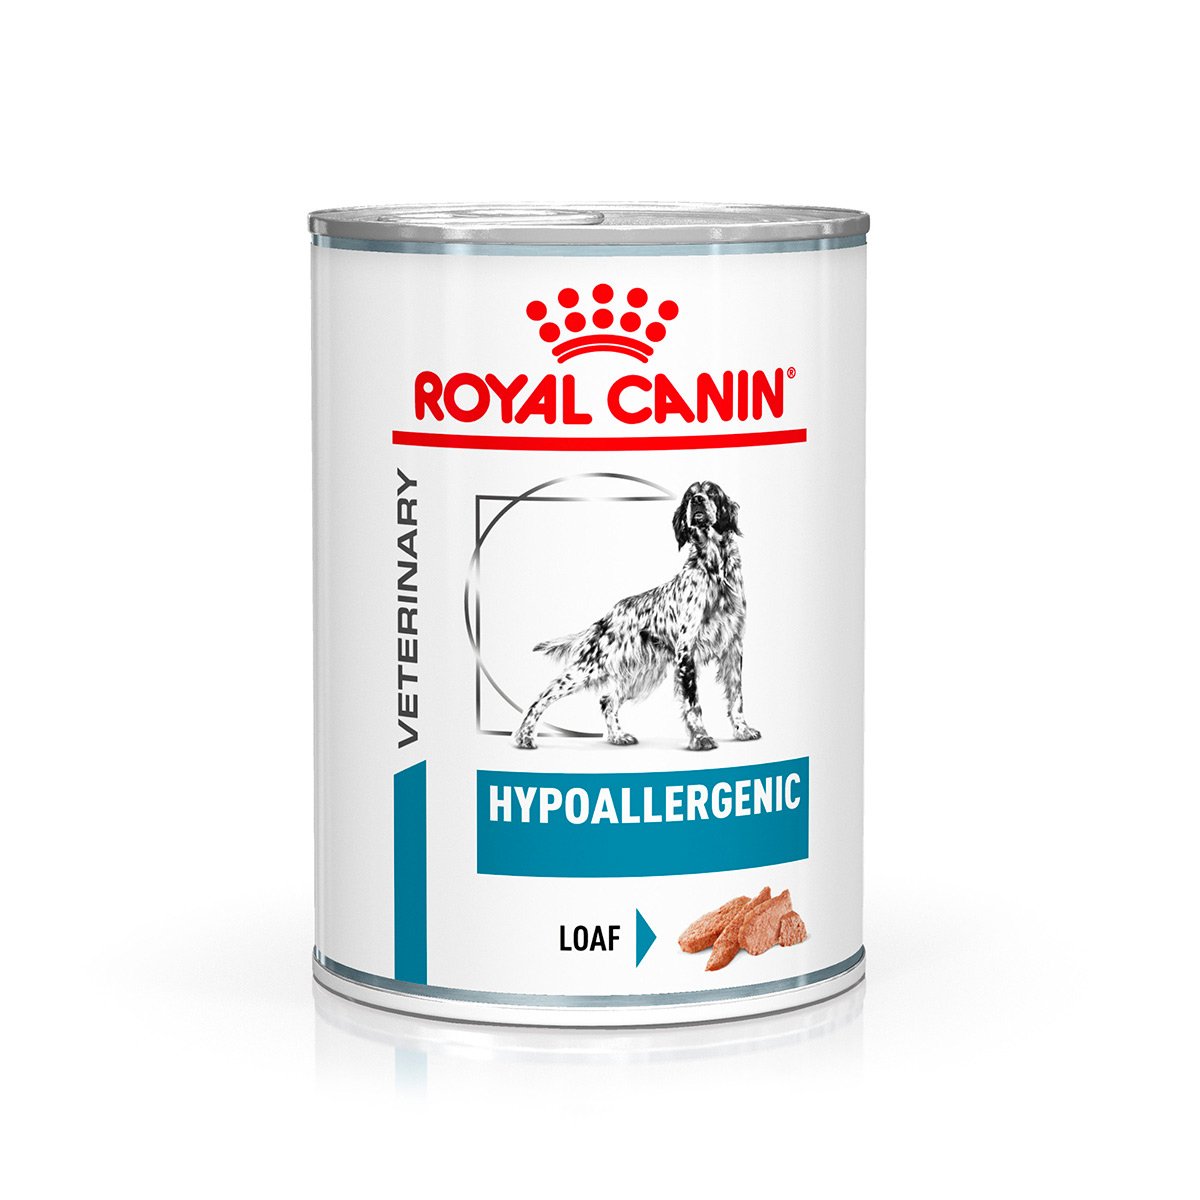 ROYAL CANIN Veterinary HYPOALLERGENIC Mousse Nassfutter für Hunde 12x400 von Royal Canin